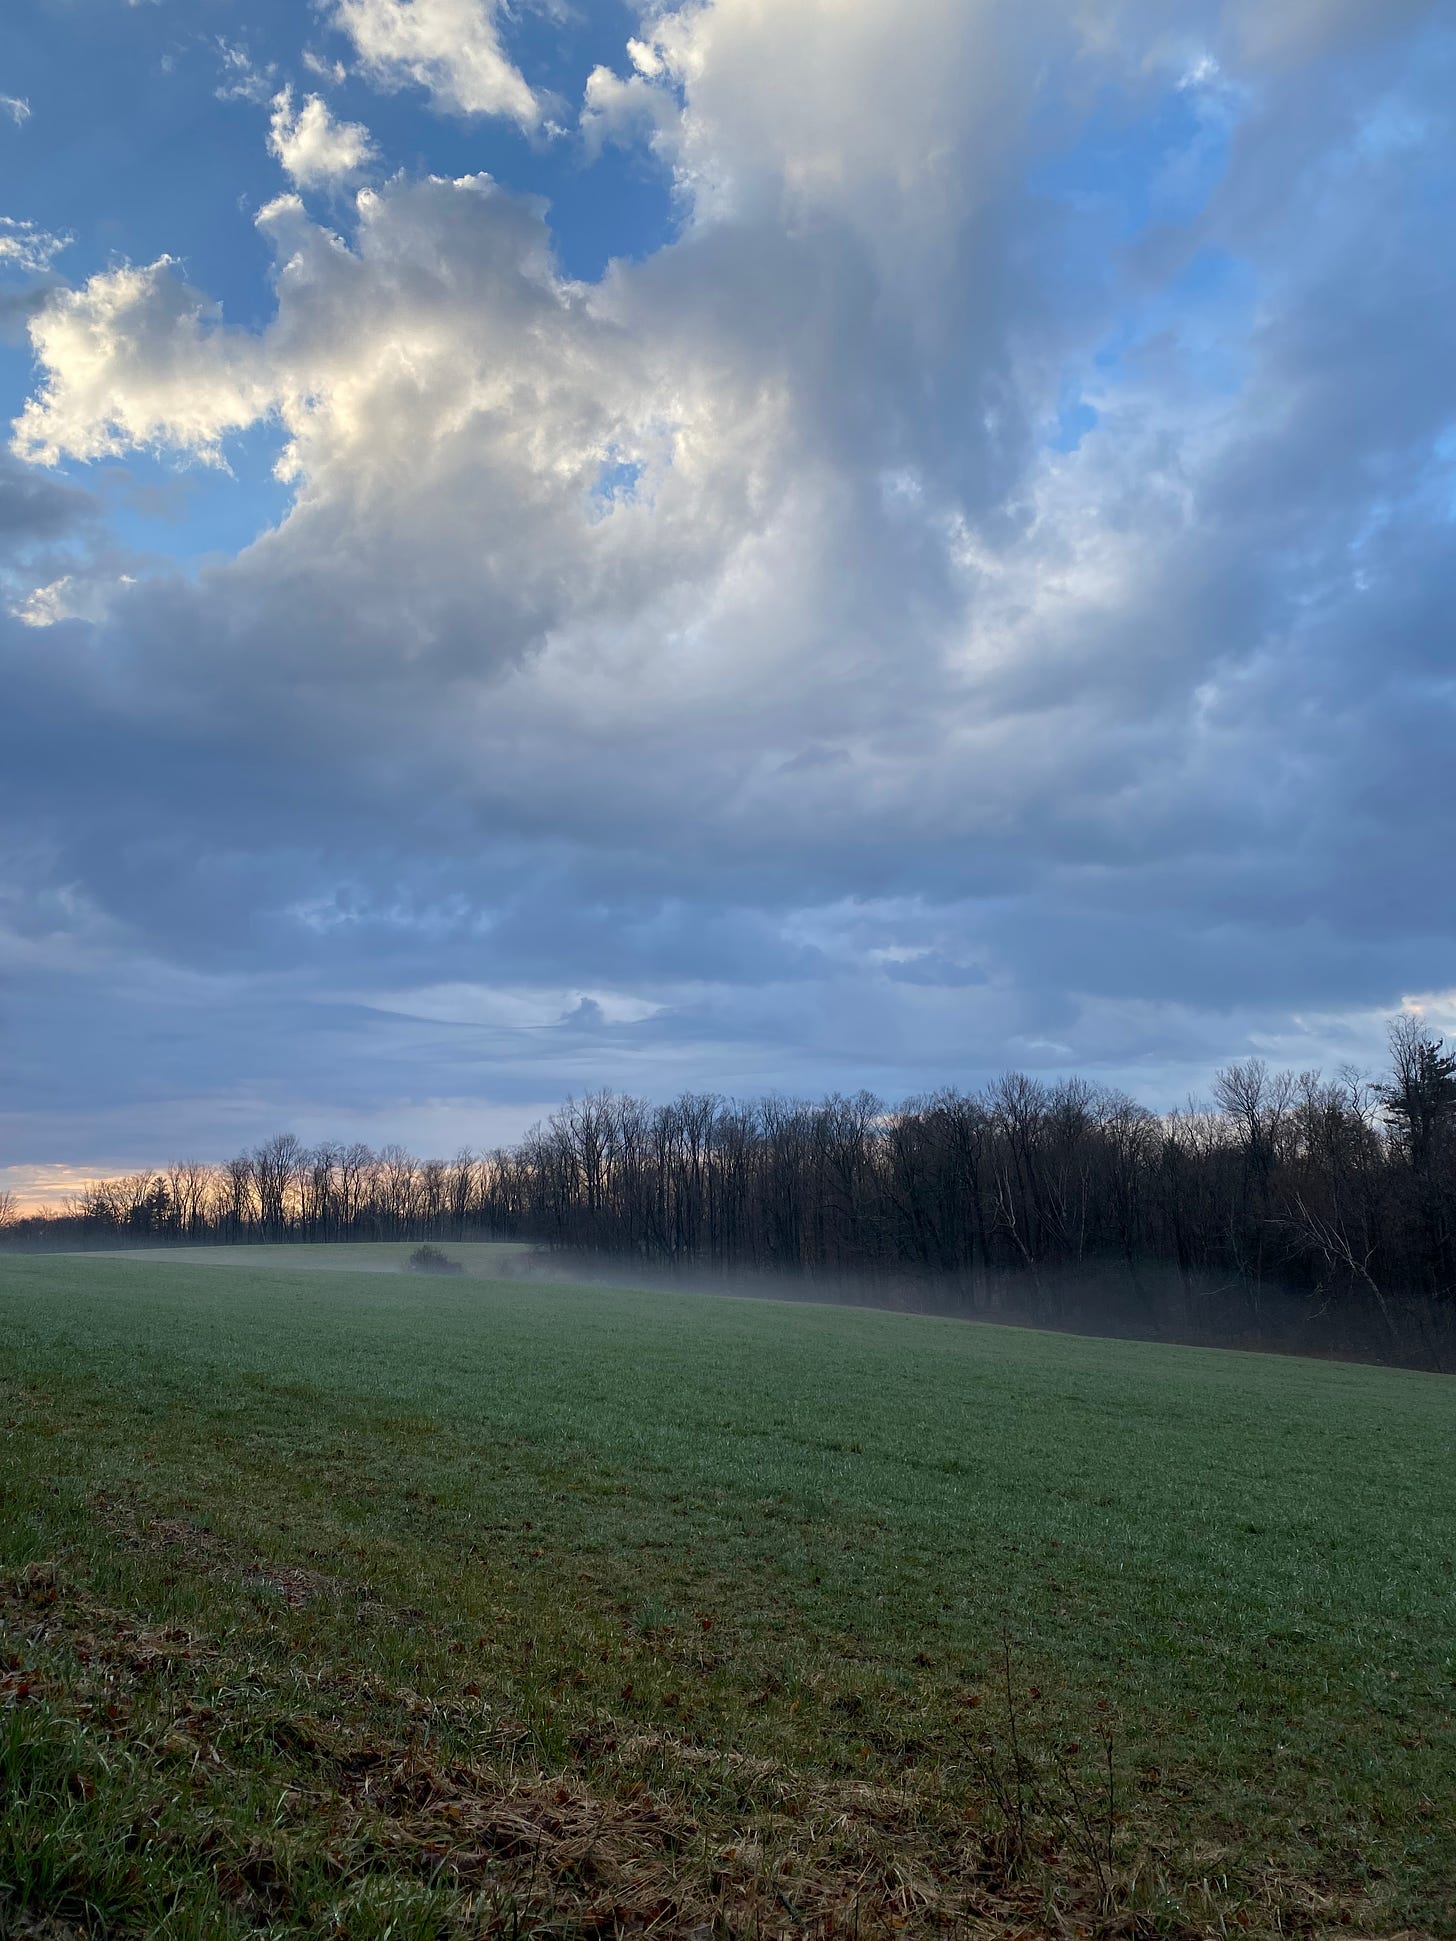 A misty green field at sunrise, under a blue sky full of swooping silver and purple clouds.